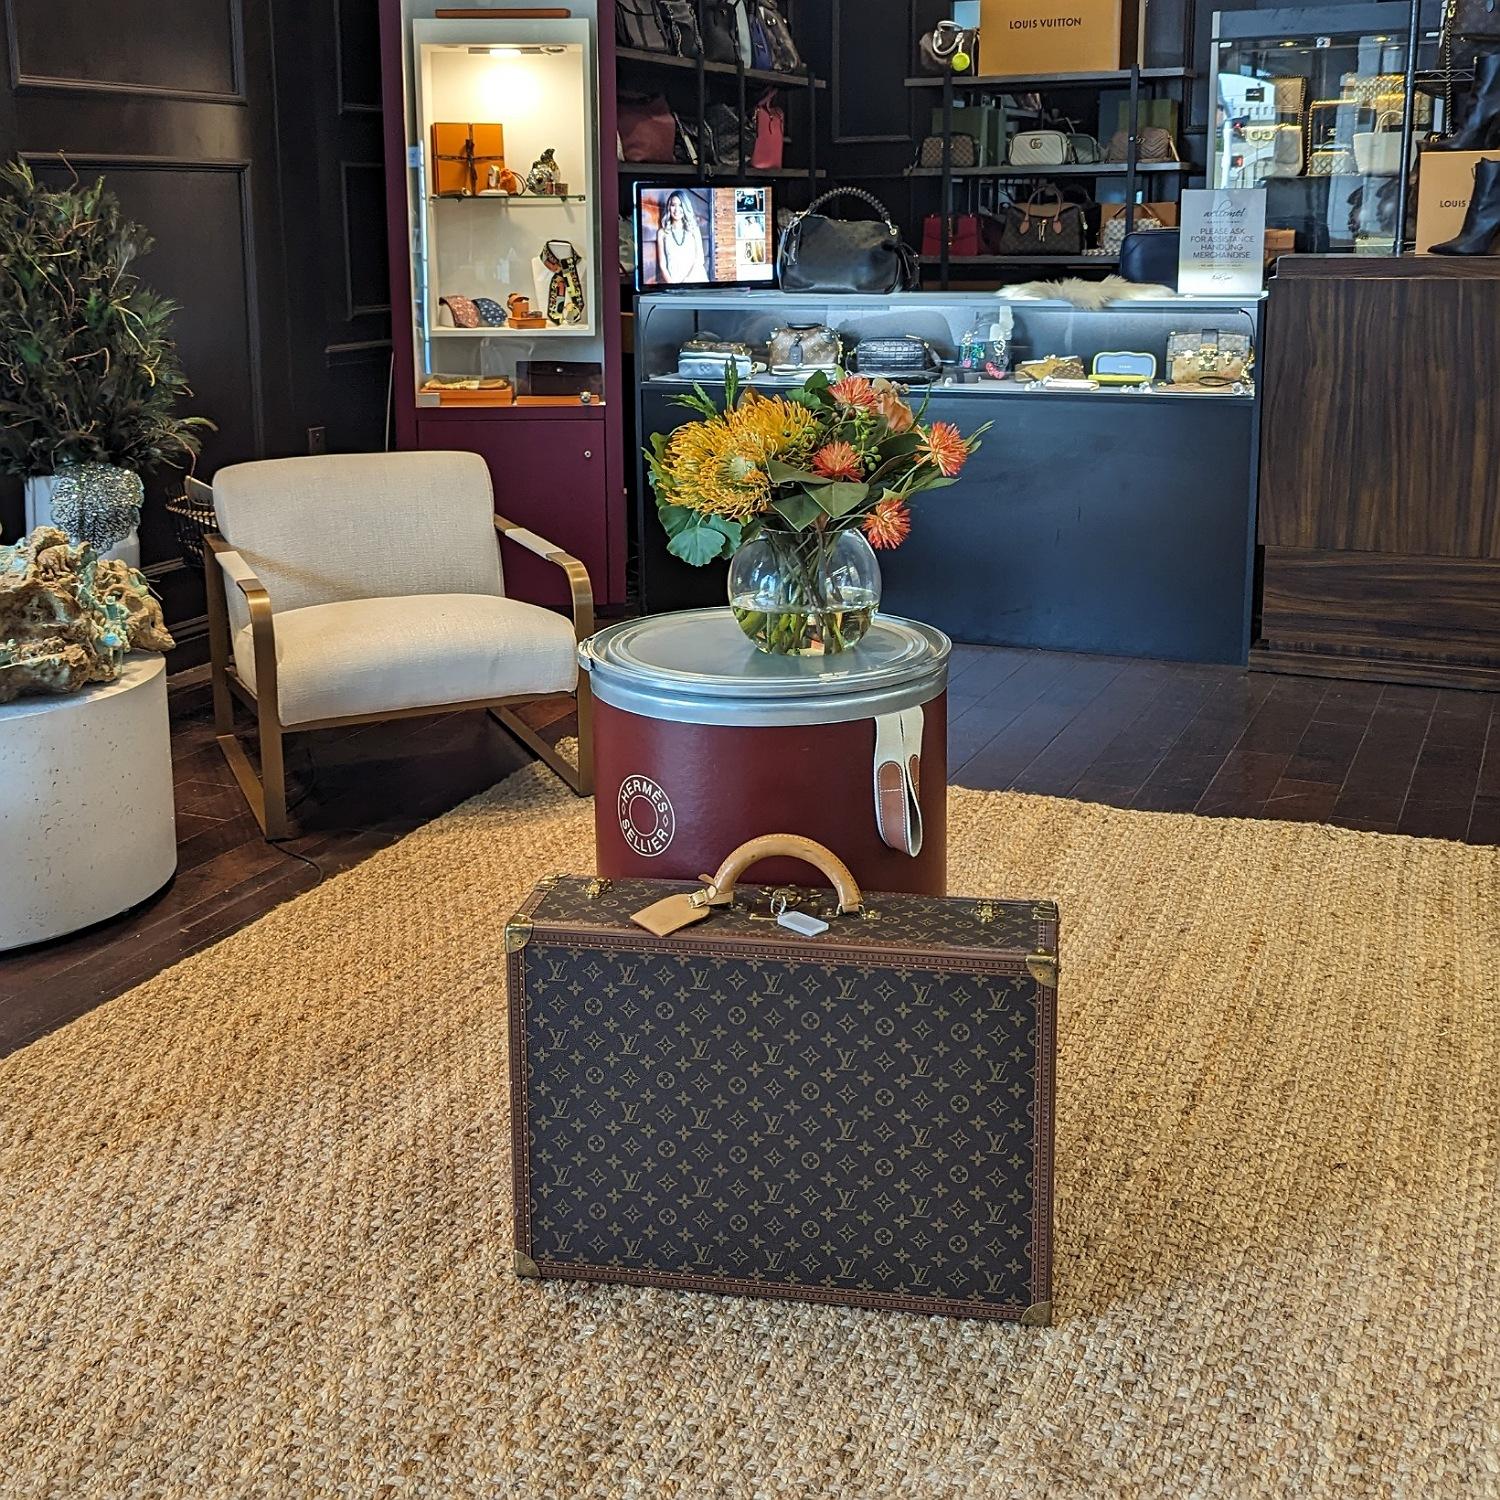 This classic hard suitcase is finely crafted of traditional Louis Vuitton monogram on toile canvas. The case features toffee colored leather trim and a reinforced vachetta leather top handle with rivets and a polished brass press lock. This opens to